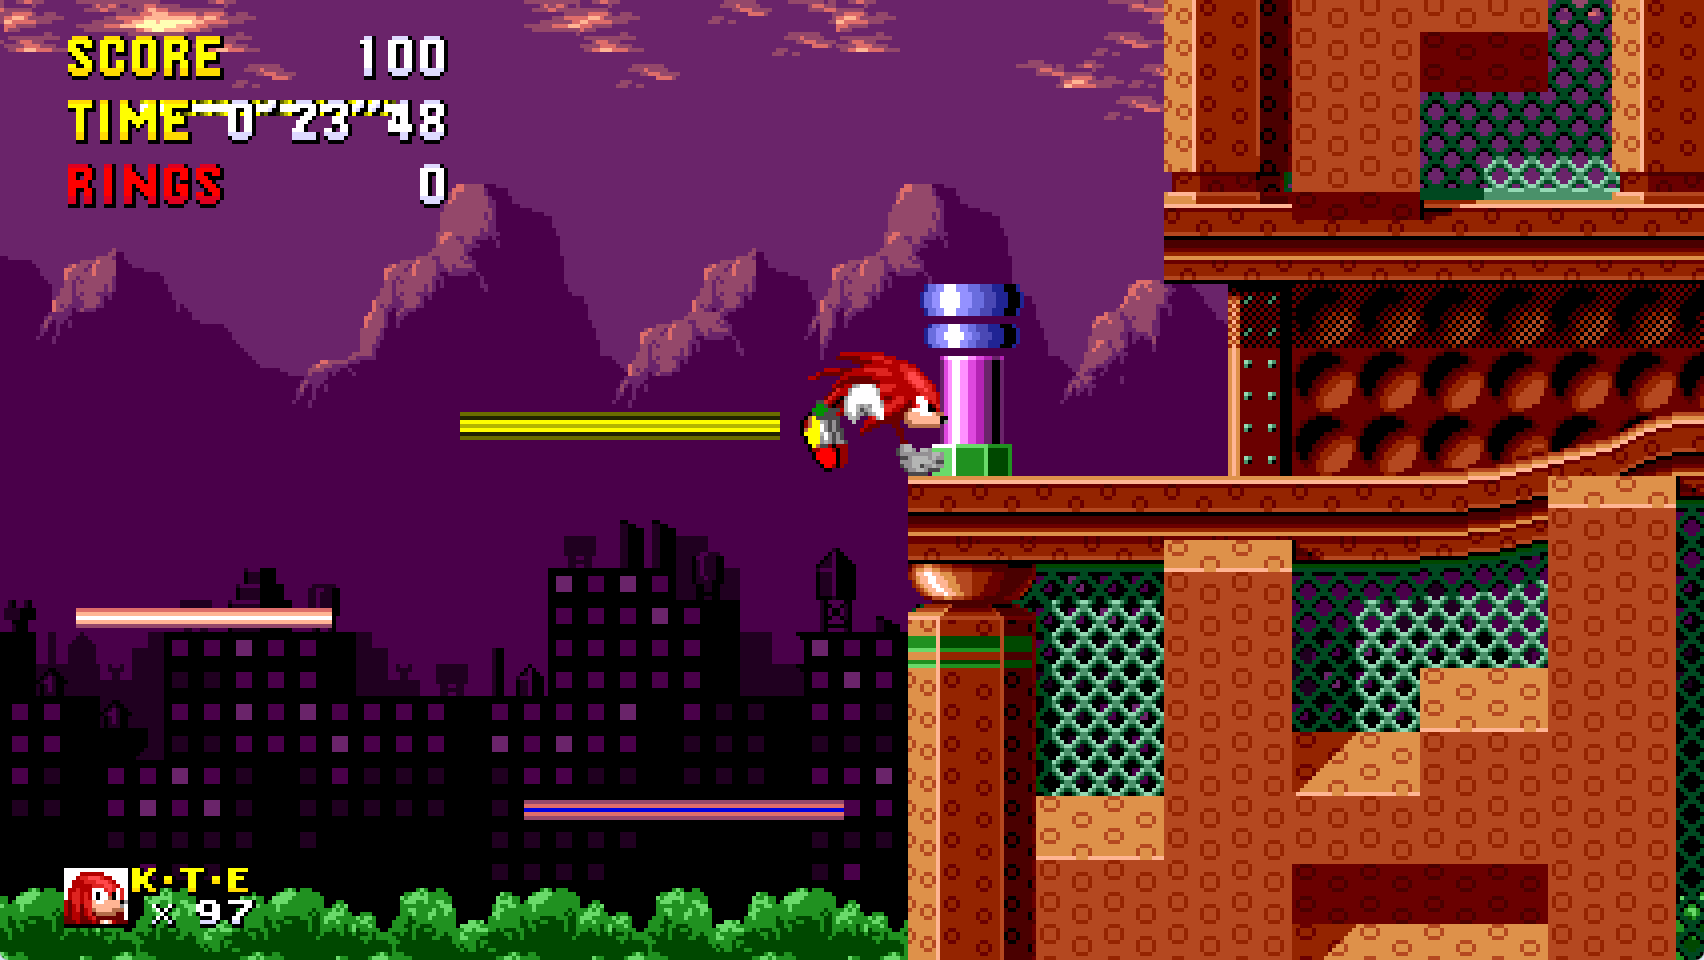 Sonic 1 Styled Knuckles [Sonic the Hedgehog Forever] [Mods]